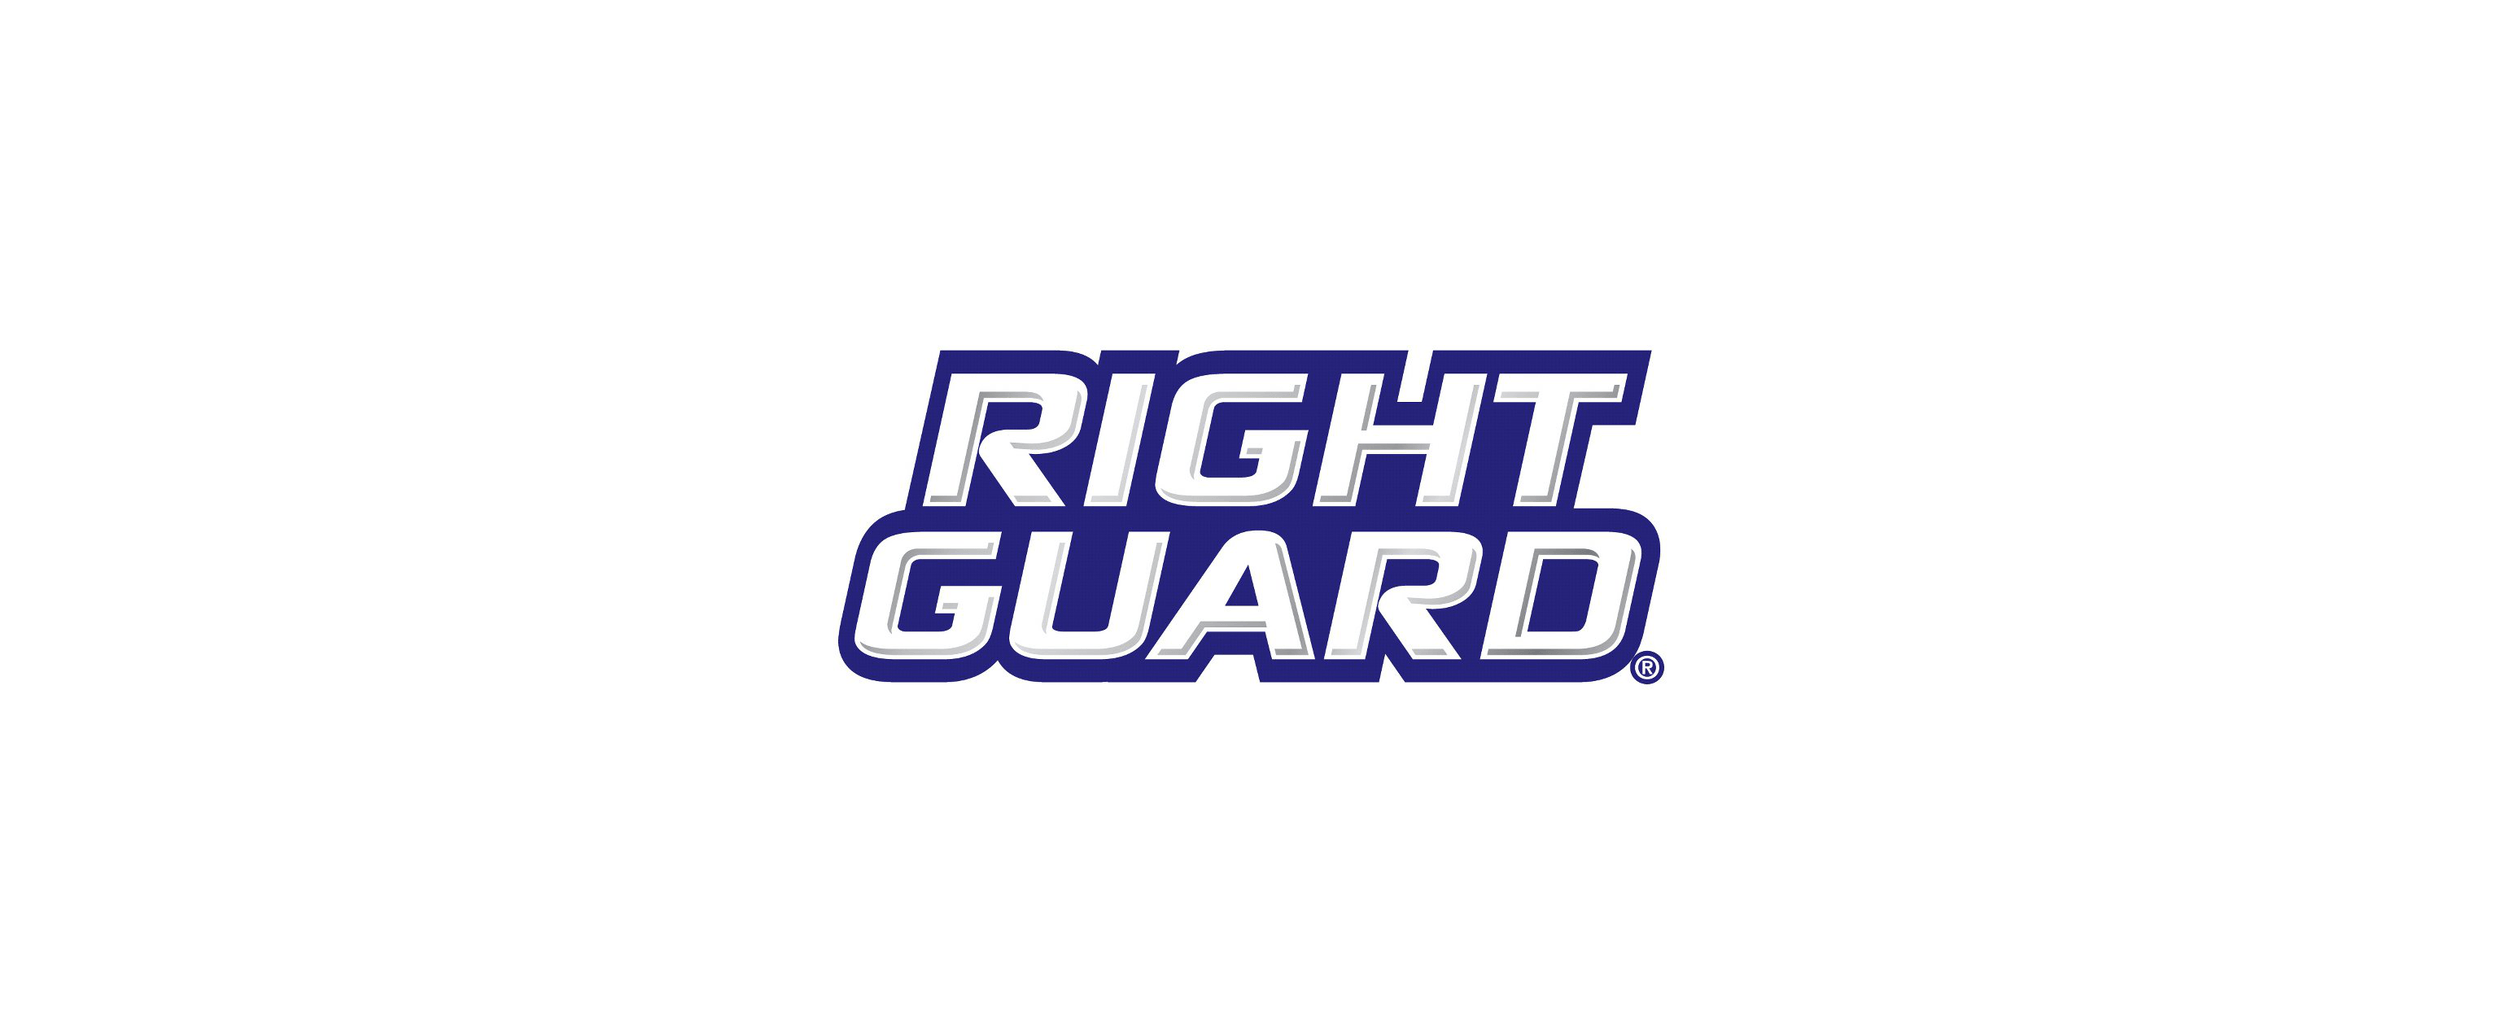 Right Guard Logo - Right Guard — jetpack|agency